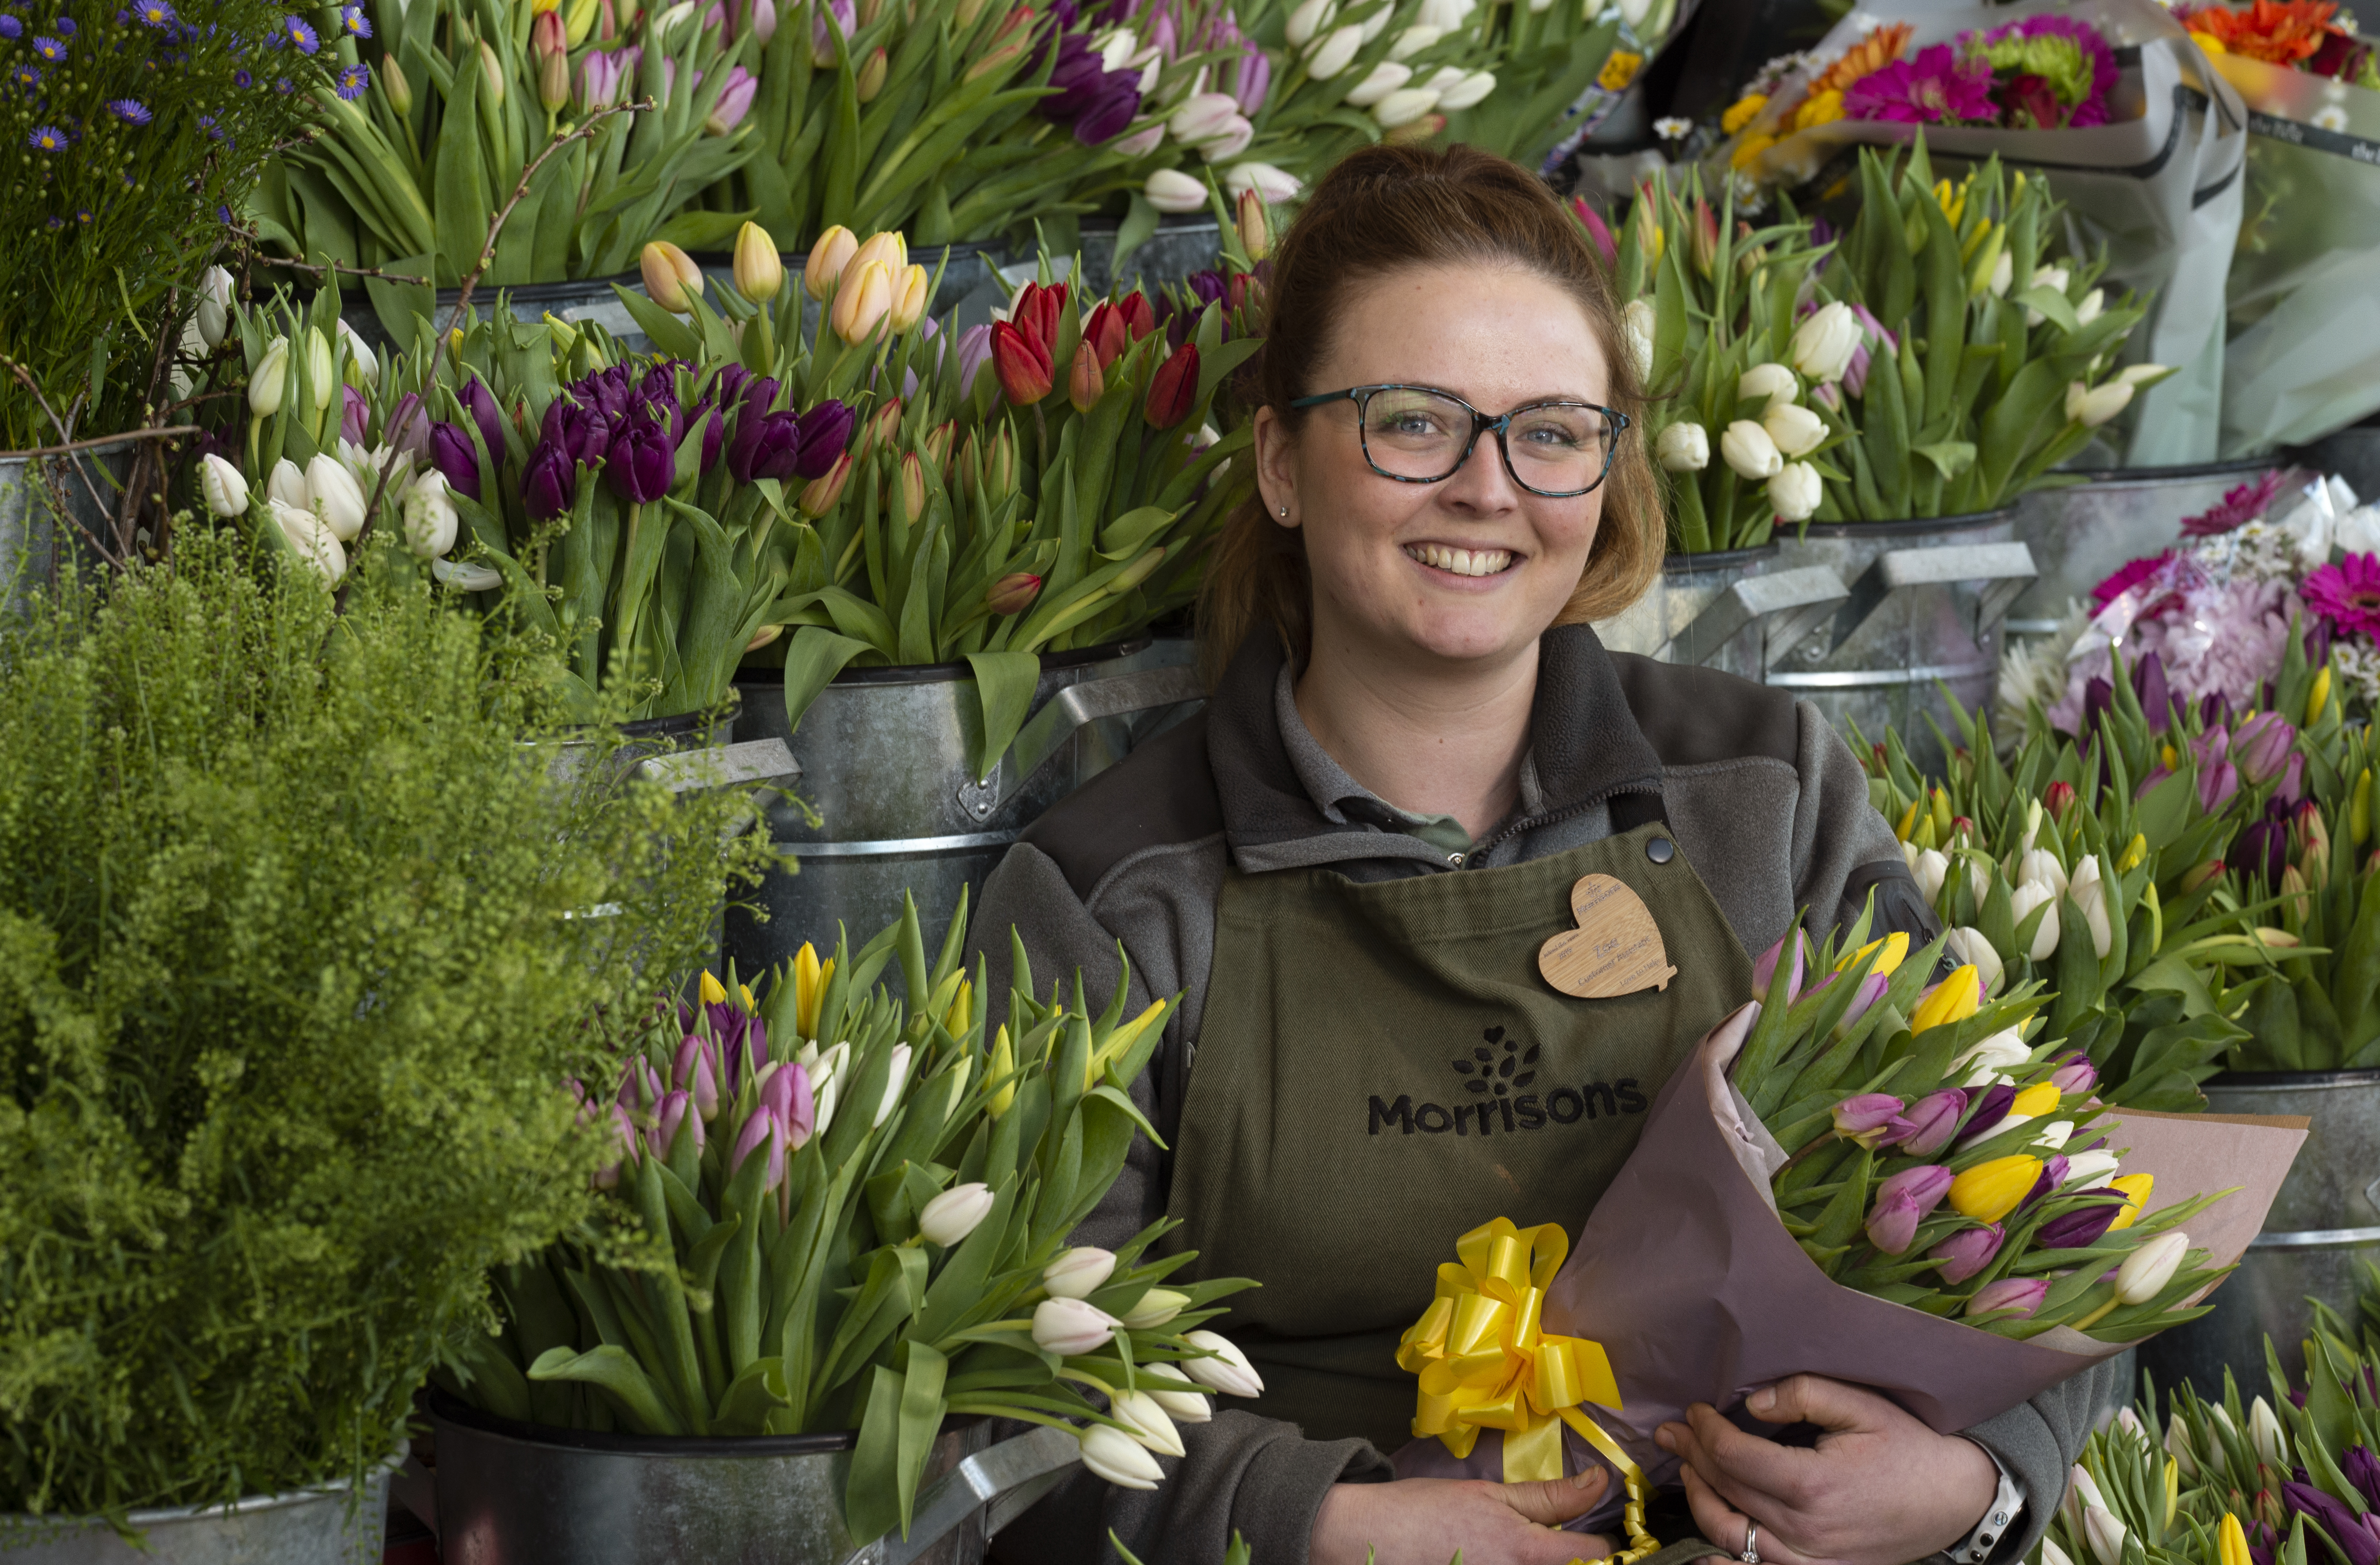 Morrisons champions British growers this Mother's Day